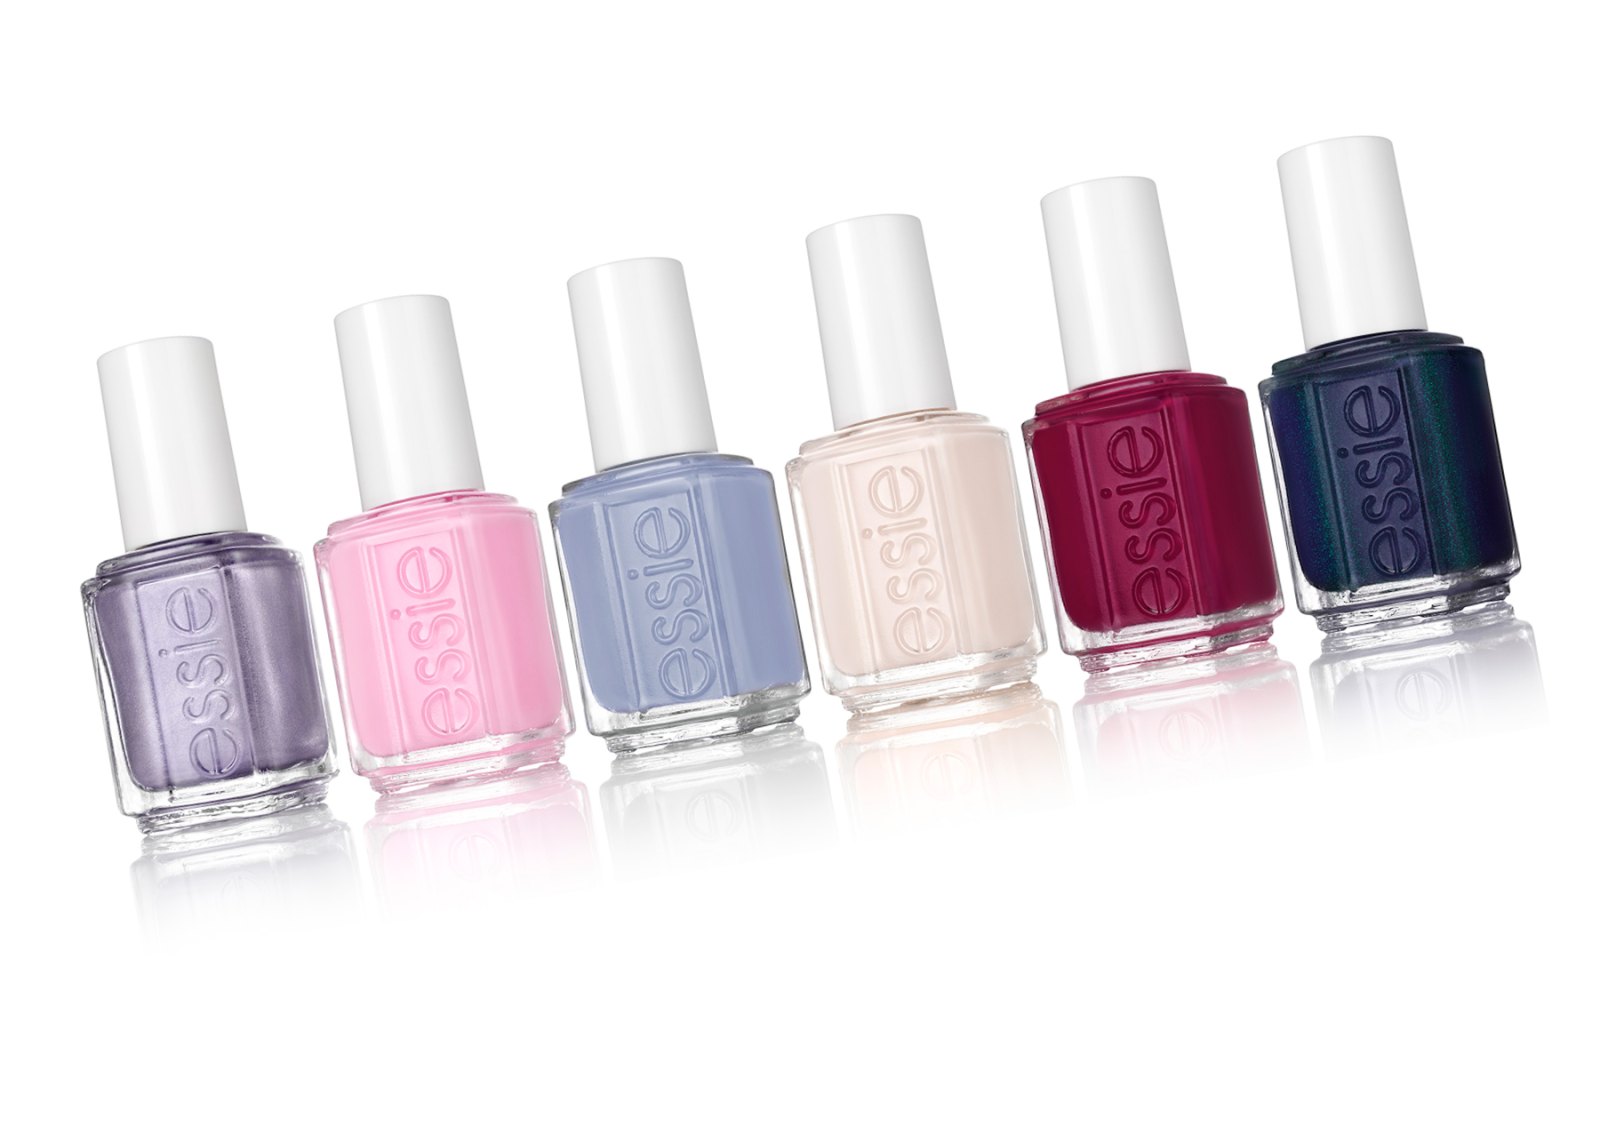 Essie's fall collection